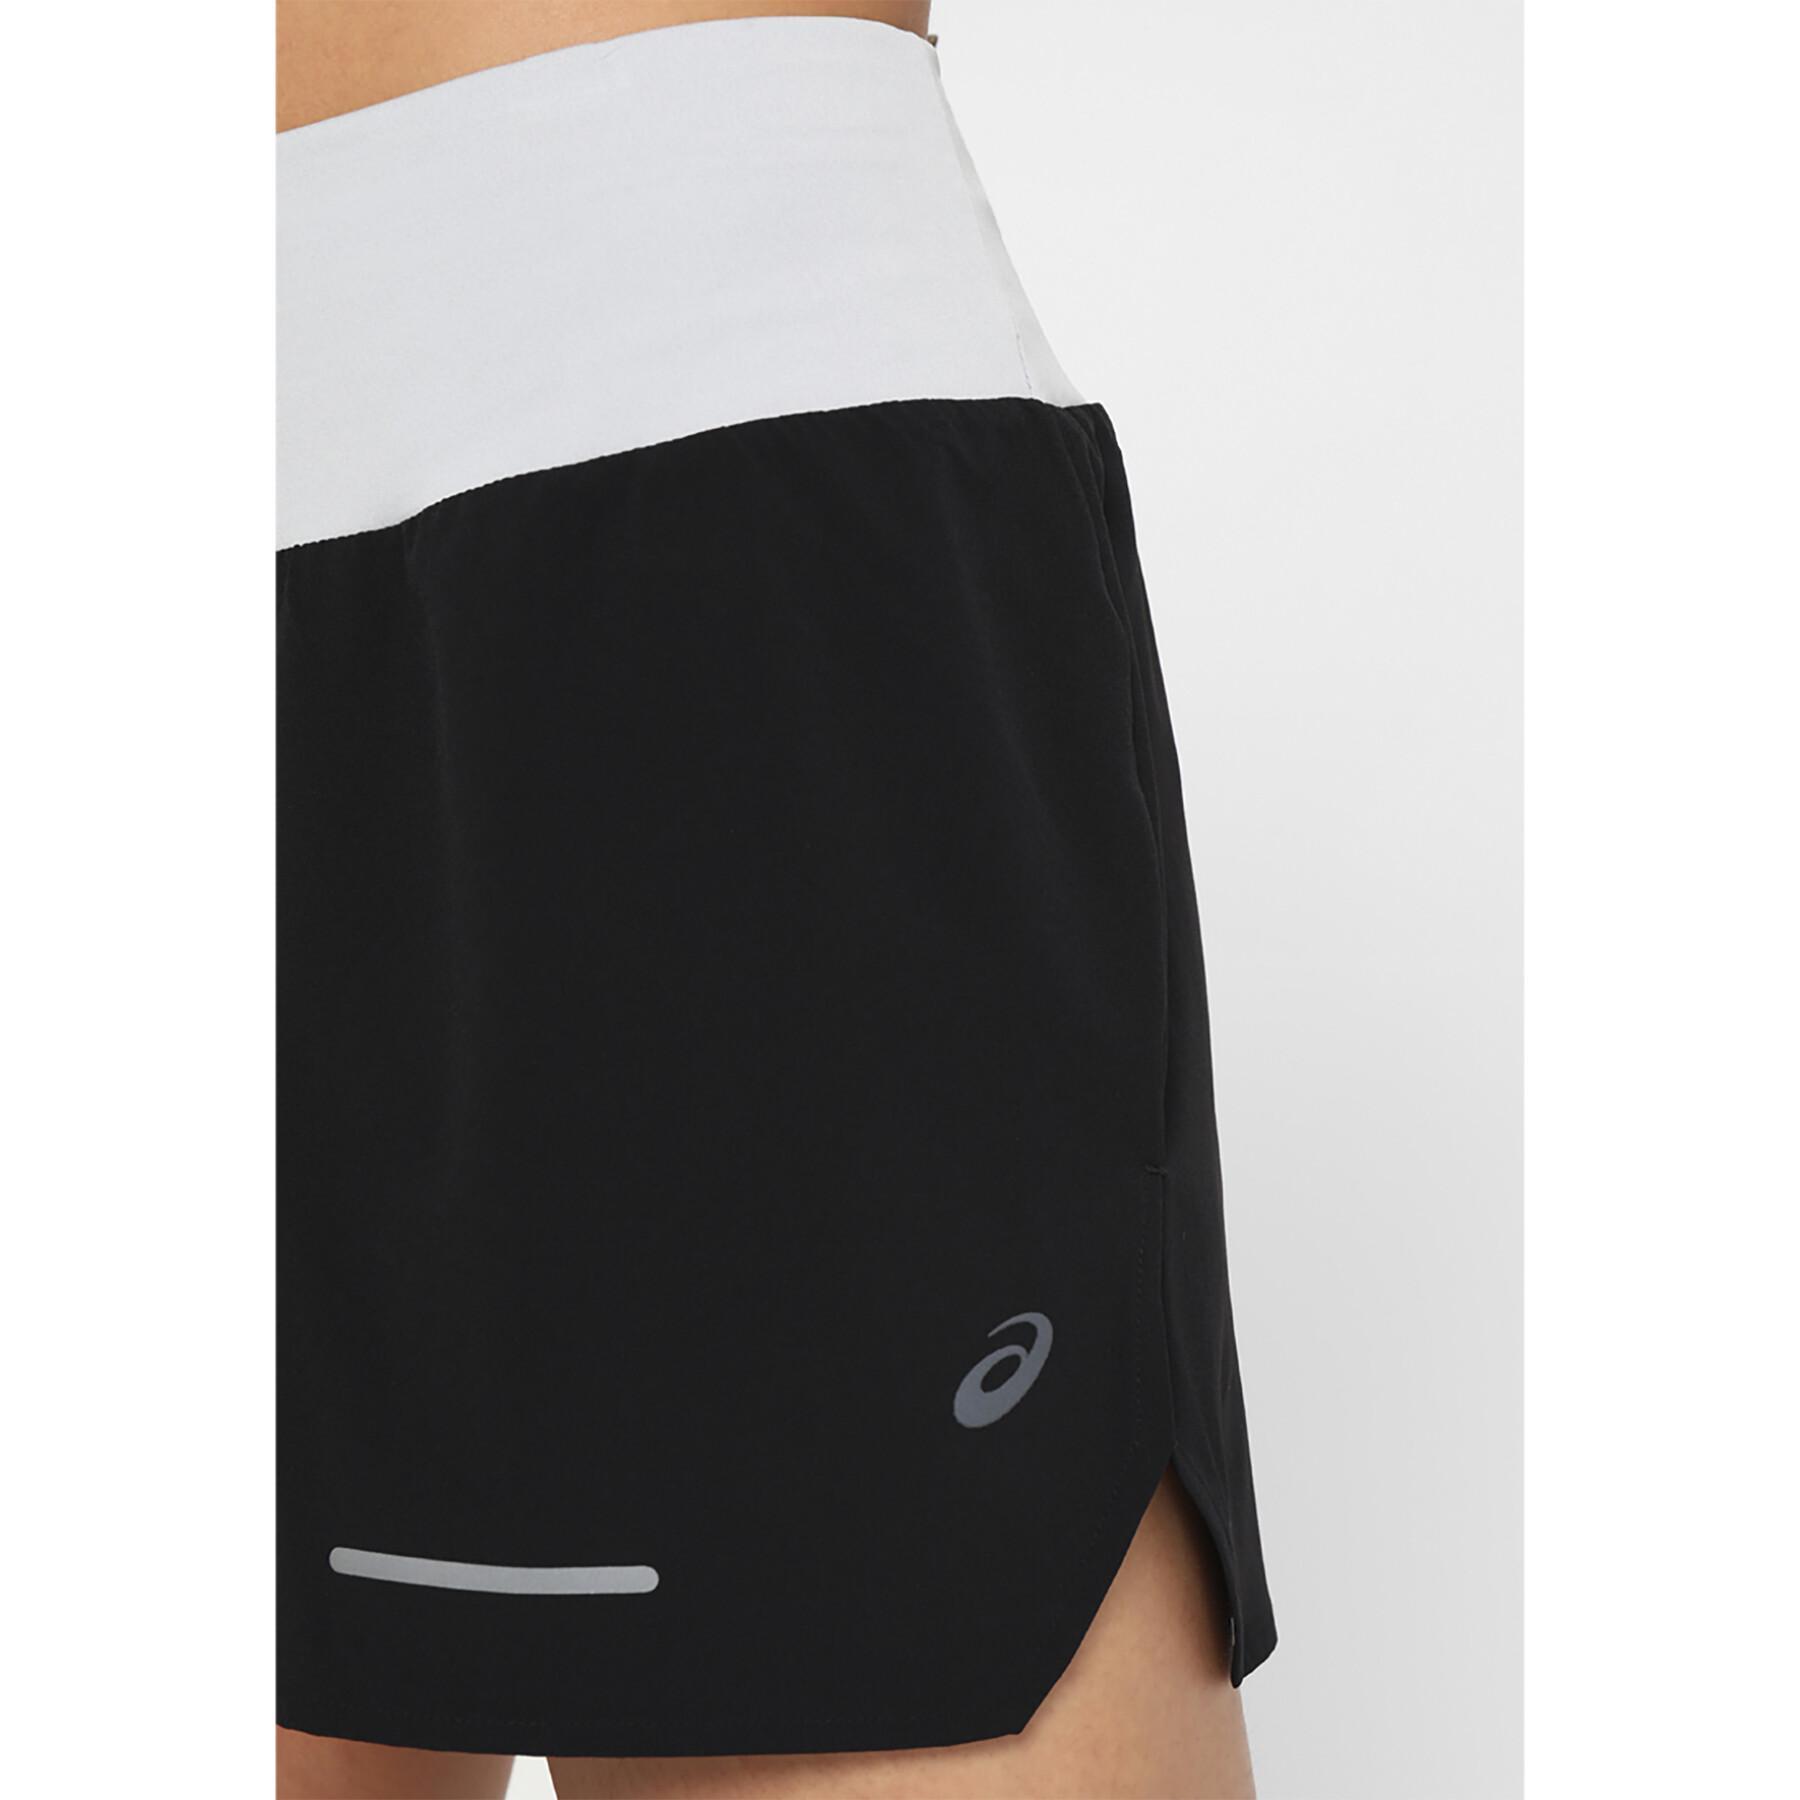 Dames shorts Asics Lite Show 4.5in